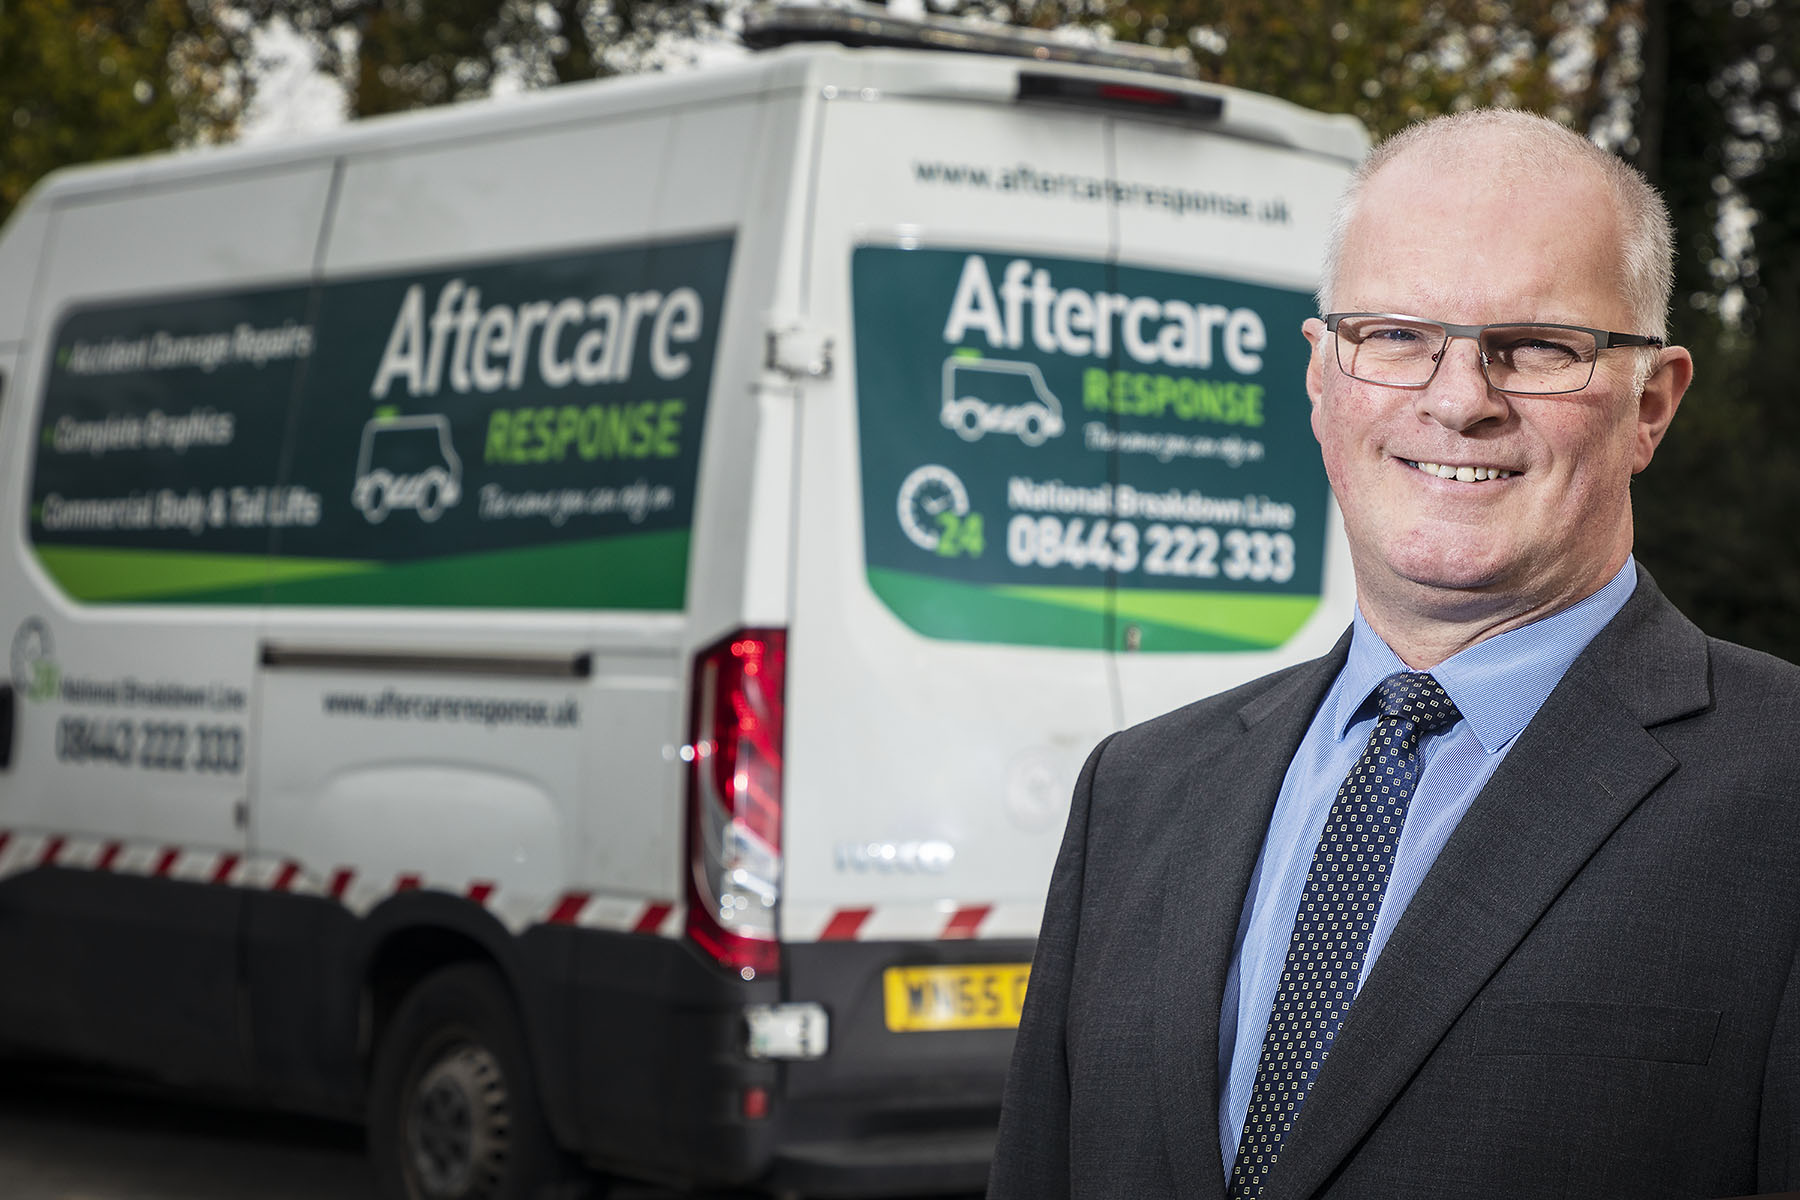 Andy brings a customer’s perspective to his new role at Aftercare Response, part of Bevan Group